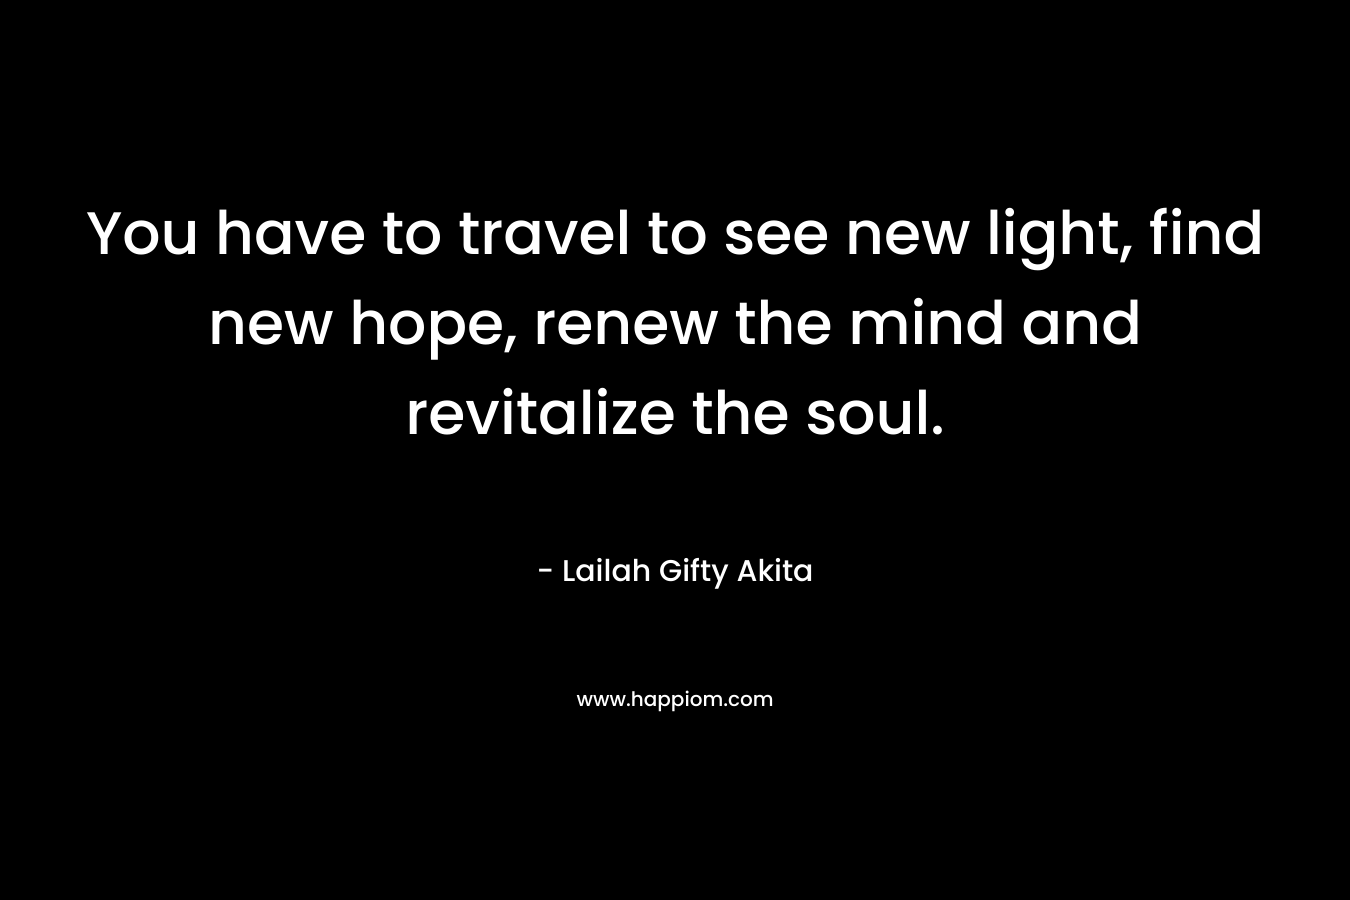 You have to travel to see new light, find new hope, renew the mind and revitalize the soul.